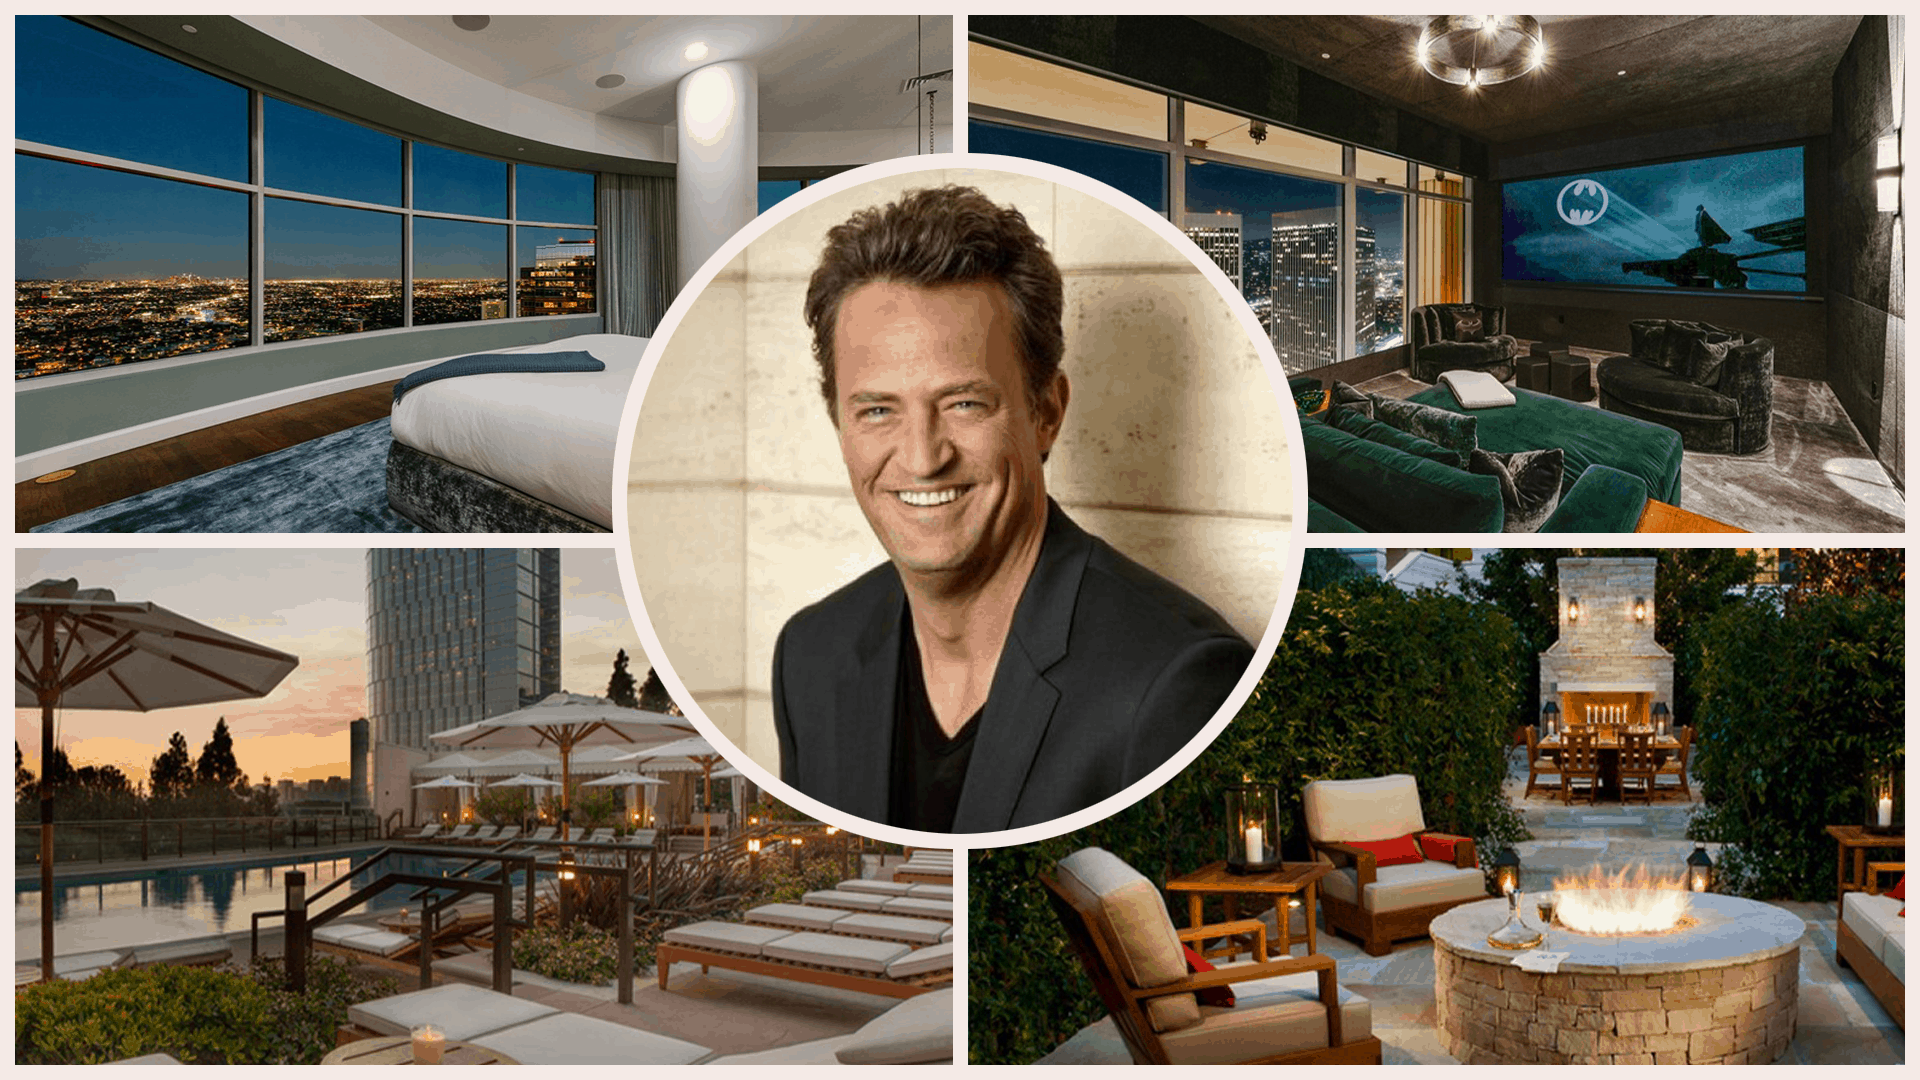 Matthew Perrys Luxury Penthouse James Campbell Los Angeles Real Estate Agent